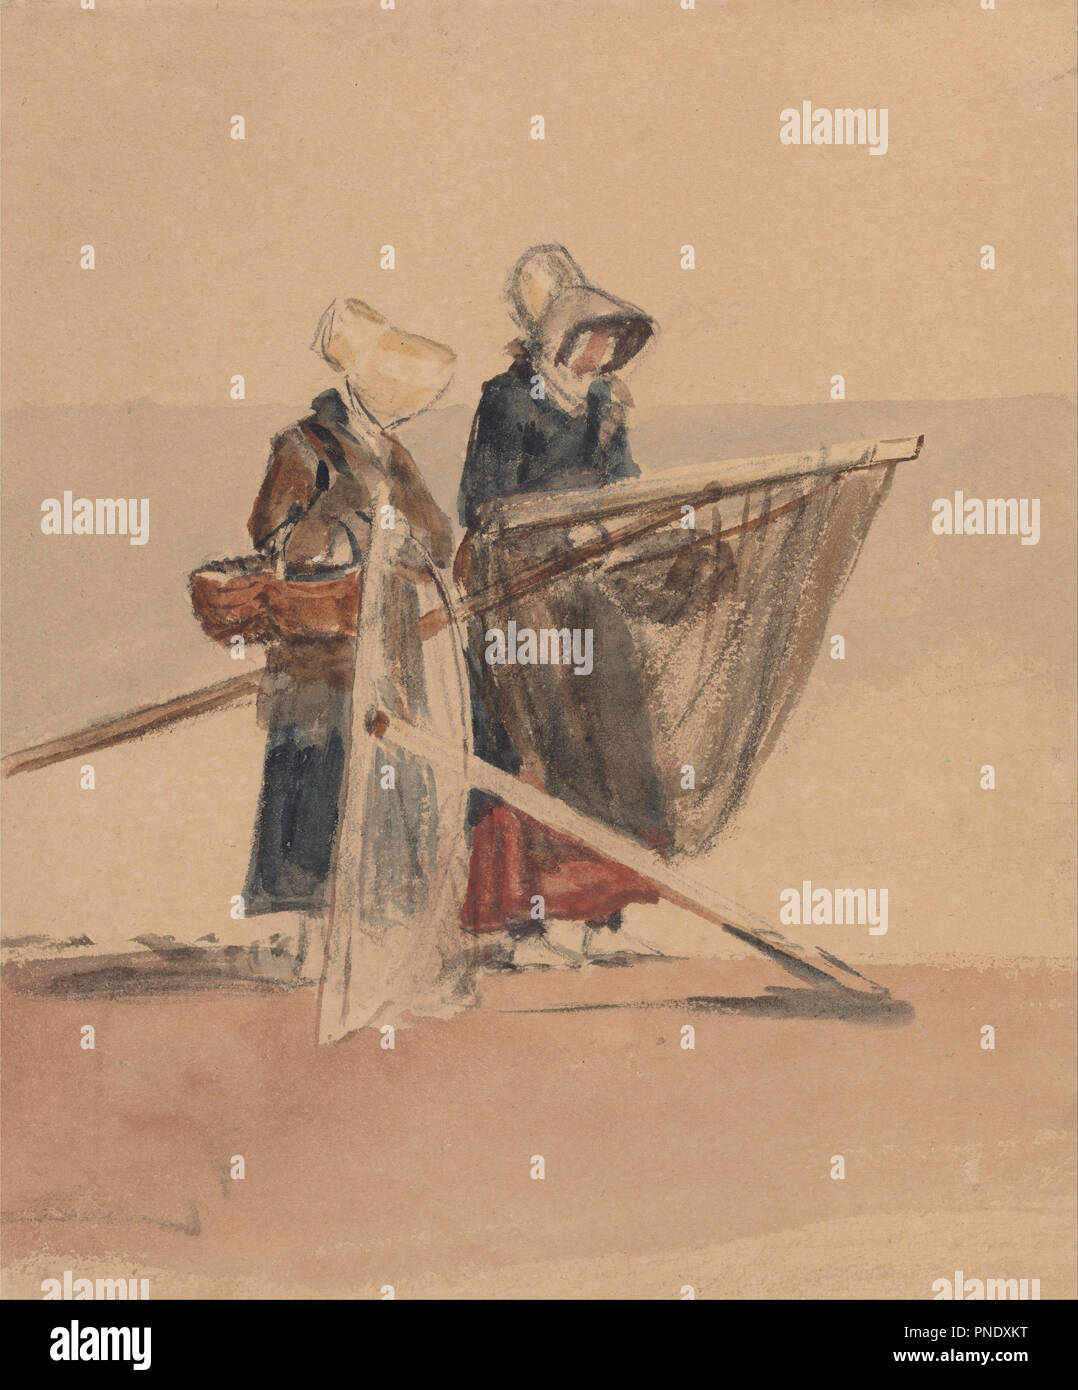 Two Girls with Shrimping Nets. Drawing. Watercolor and black chalk on medium, beige, smooth wove paper. Height: 225 mm (8.85 in); Width: 187 mm (7.36 in). Author: Peter DeWint. Stock Photo